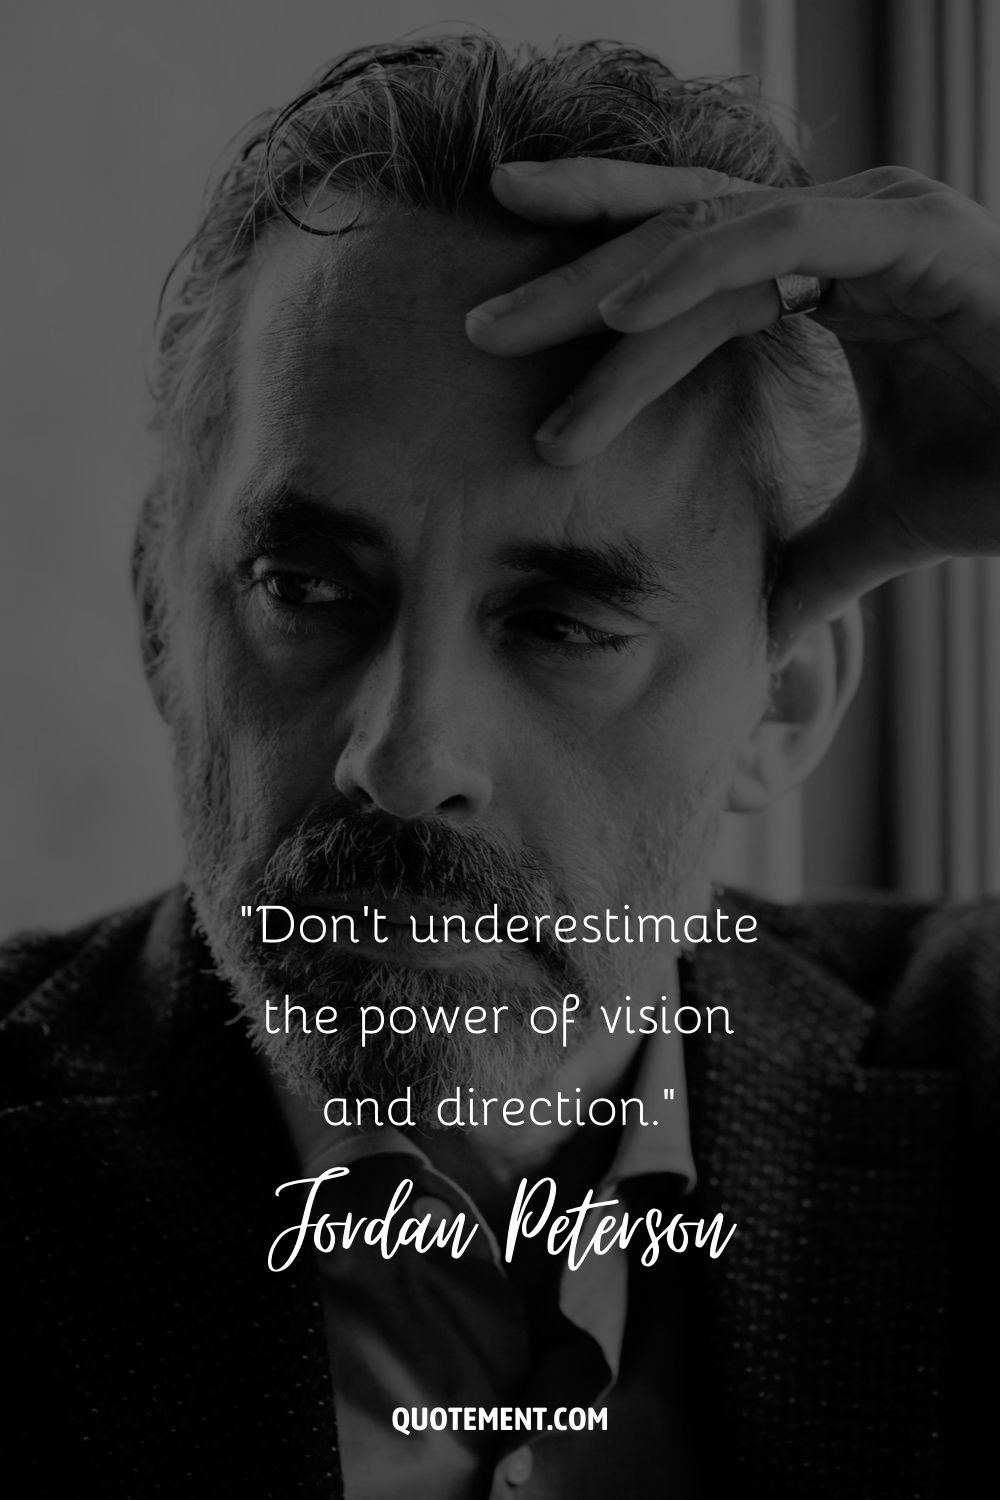 Don’t underestimate the power of vision and direction